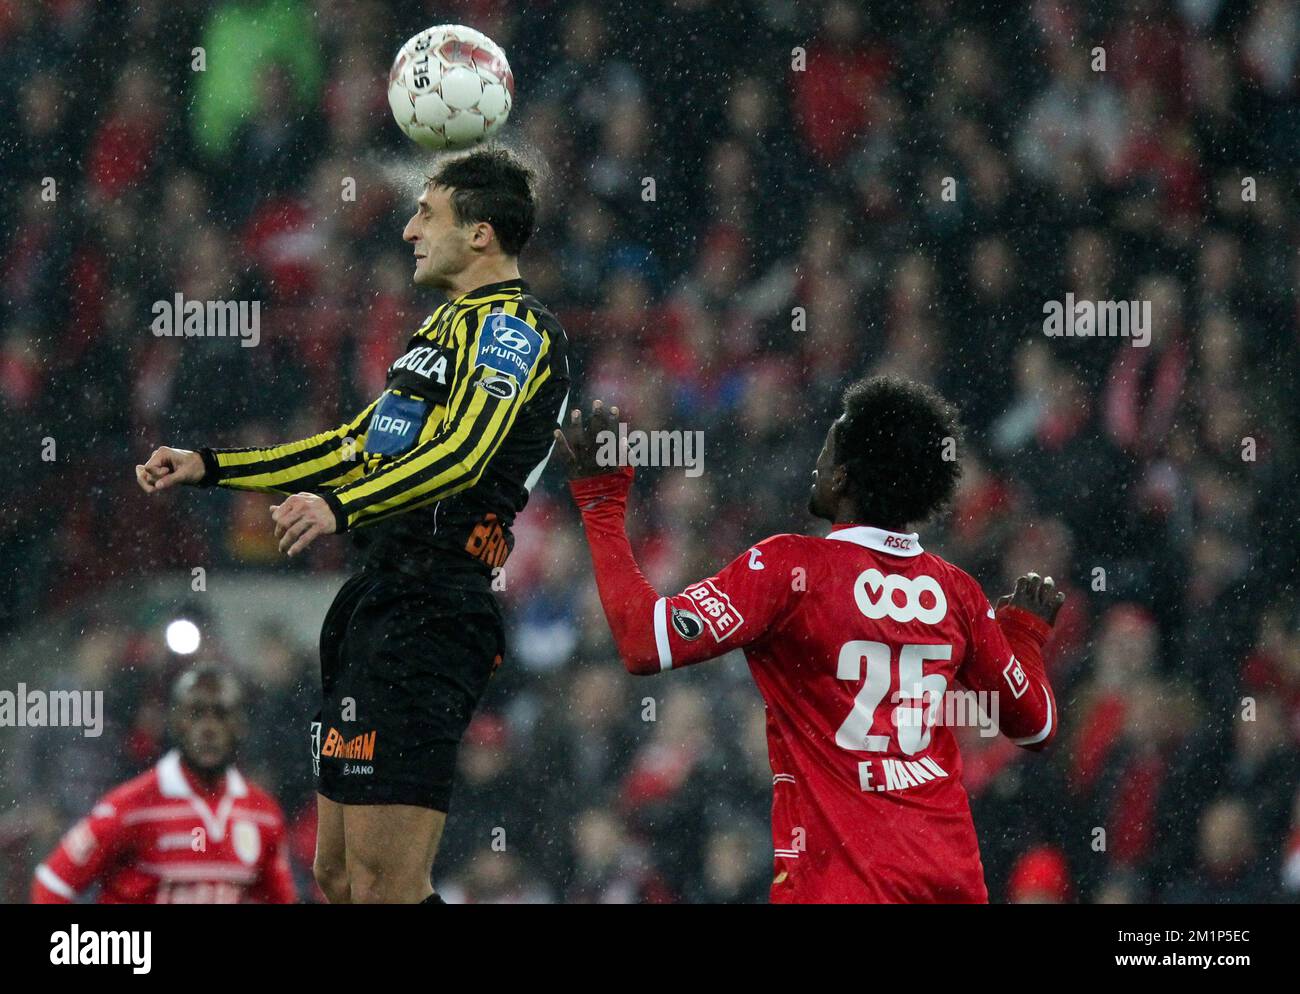 20121123 - LIEGE, BELGIUM: Lierse's Kostadin Hazurov and Standard's Antonio Pereira Dos Santos 'Kanu' fight for the ball during the Jupiler Pro League match between Standard and Lierse, in Liege, Friday 23 November 2012, on day 17 of the Belgian soccer championship. BELGA PHOTO VIRGINIE LEFOUR Stock Photo